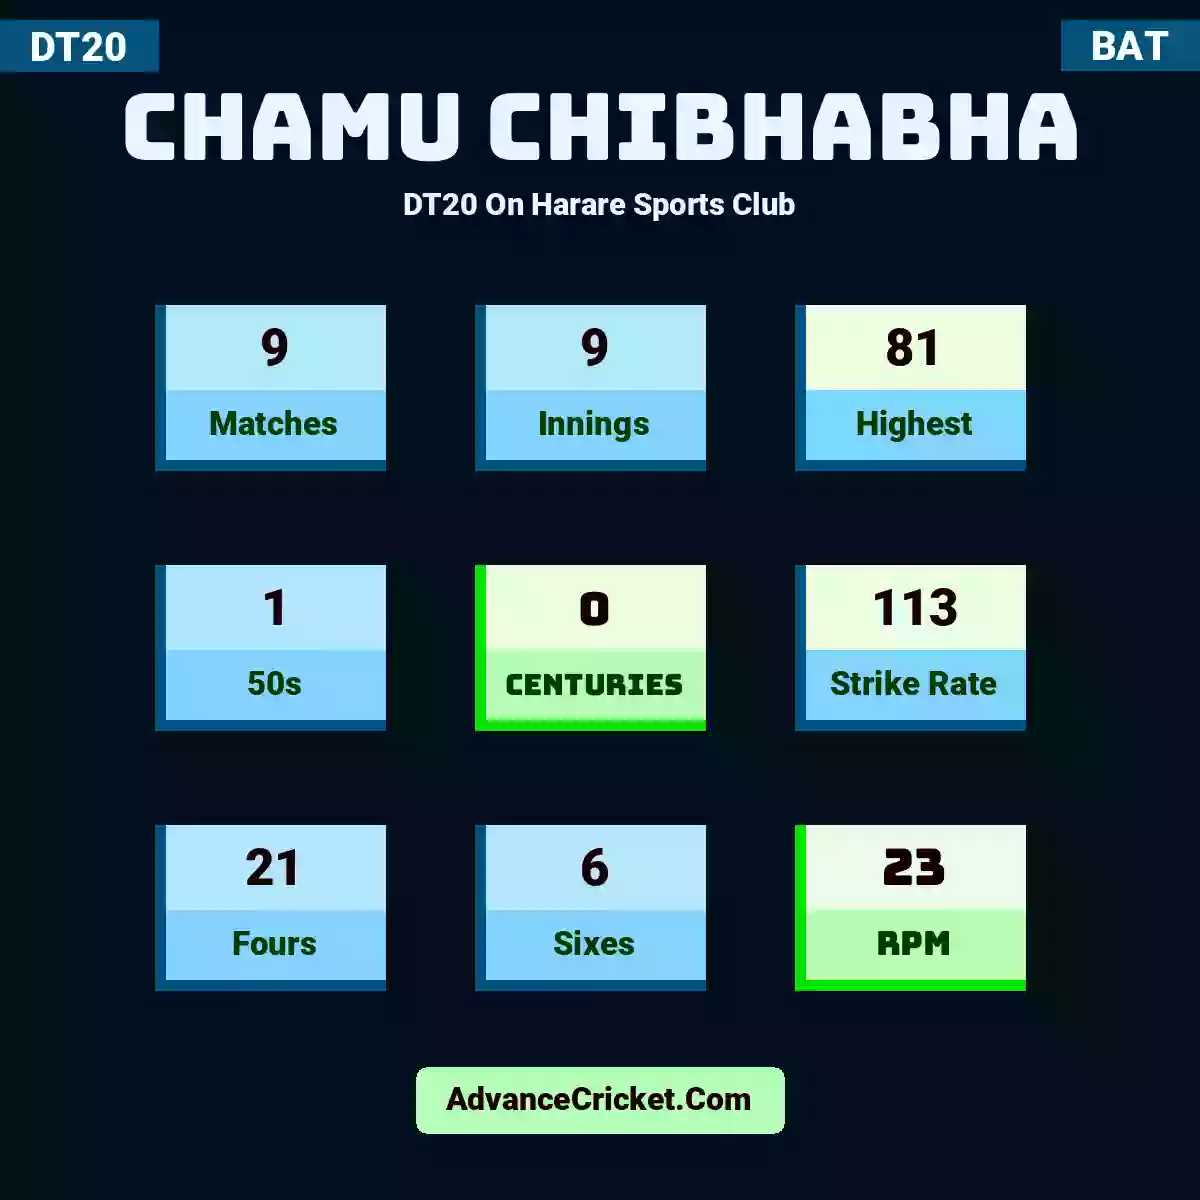 Chamu Chibhabha DT20  On Harare Sports Club, Chamu Chibhabha played 9 matches, scored 81 runs as highest, 1 half-centuries, and 0 centuries, with a strike rate of 113. C.Chibhabha hit 21 fours and 6 sixes, with an RPM of 23.